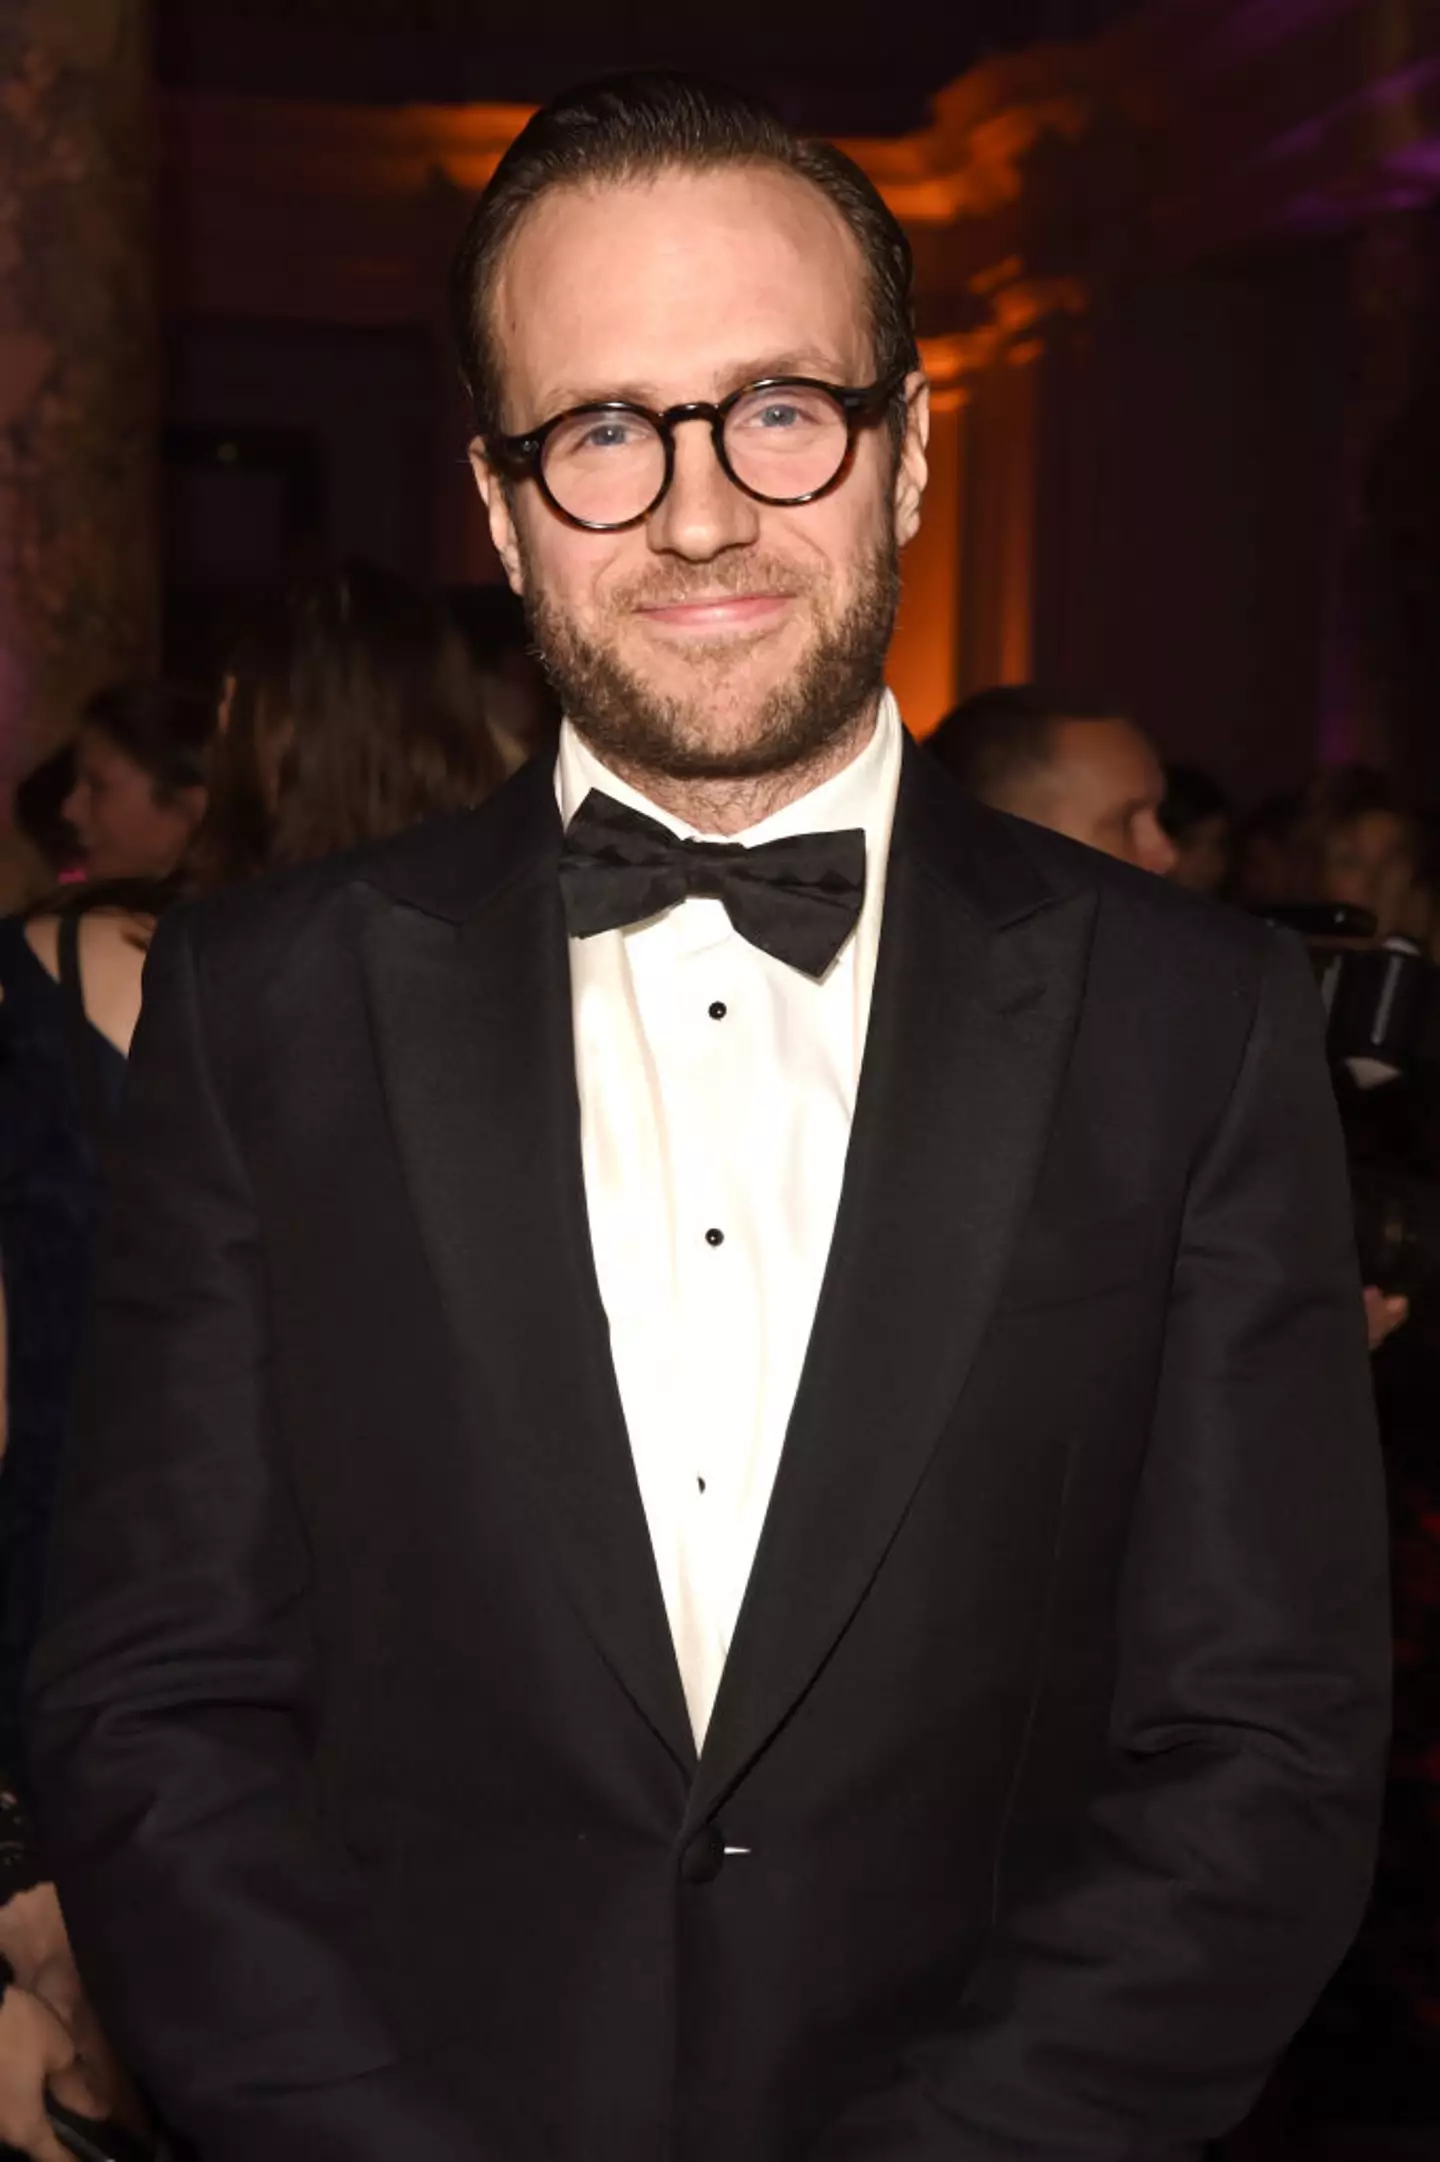 Actor Rafe Spall has performed in 18 sex scenes over his career. (Dave Benett/Getty Images)